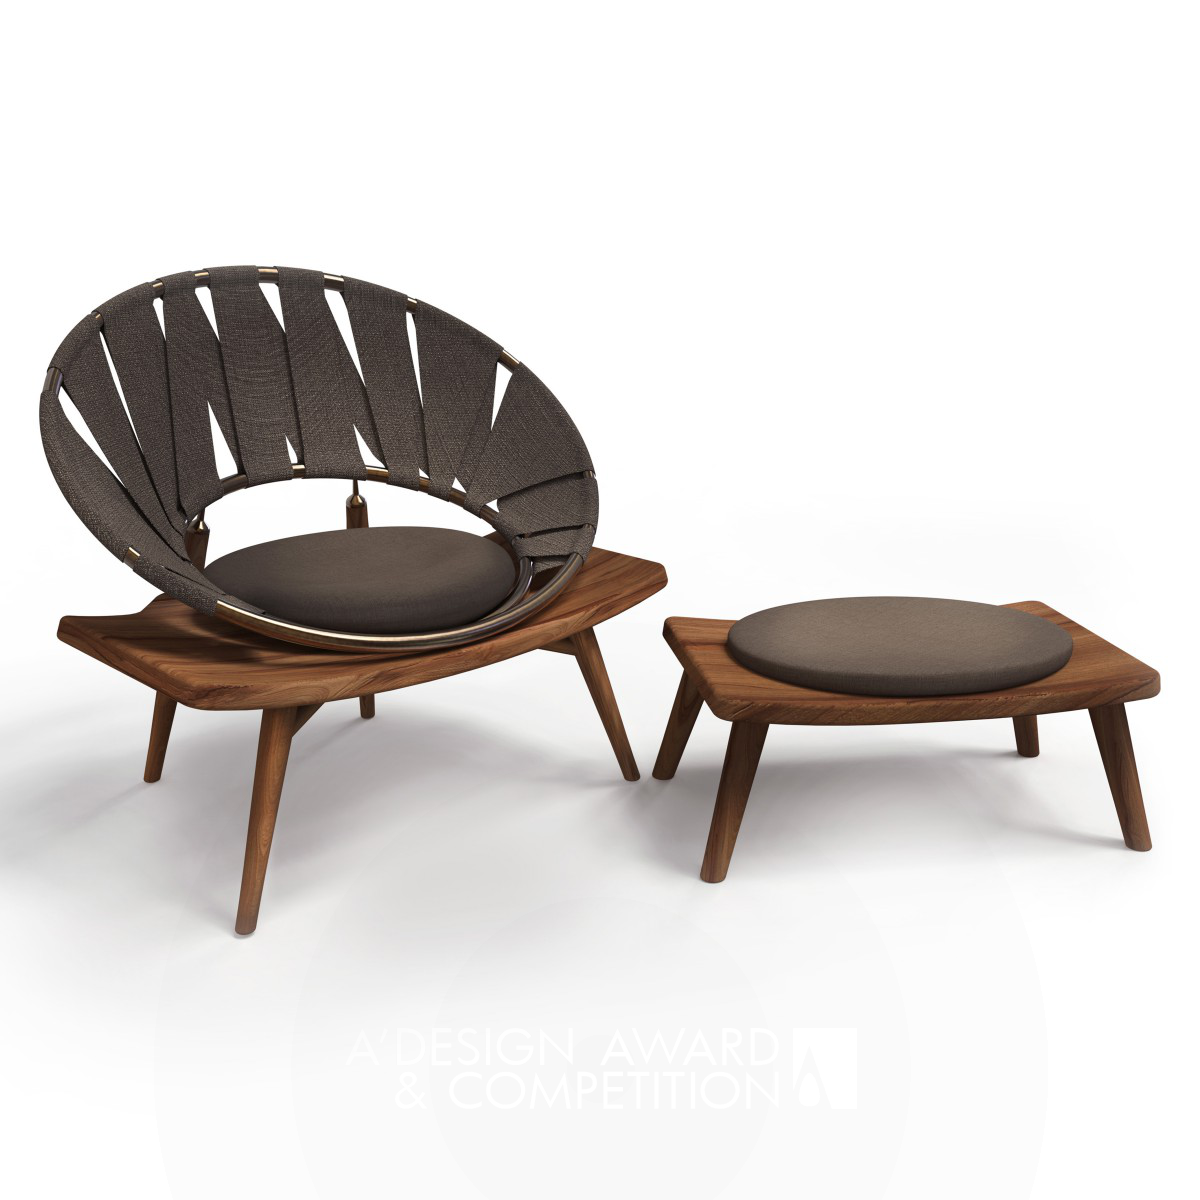 Wei Jingye wins Bronze at the prestigious A' Furniture Design Award with Ring Chair Novelty and Comfortable.